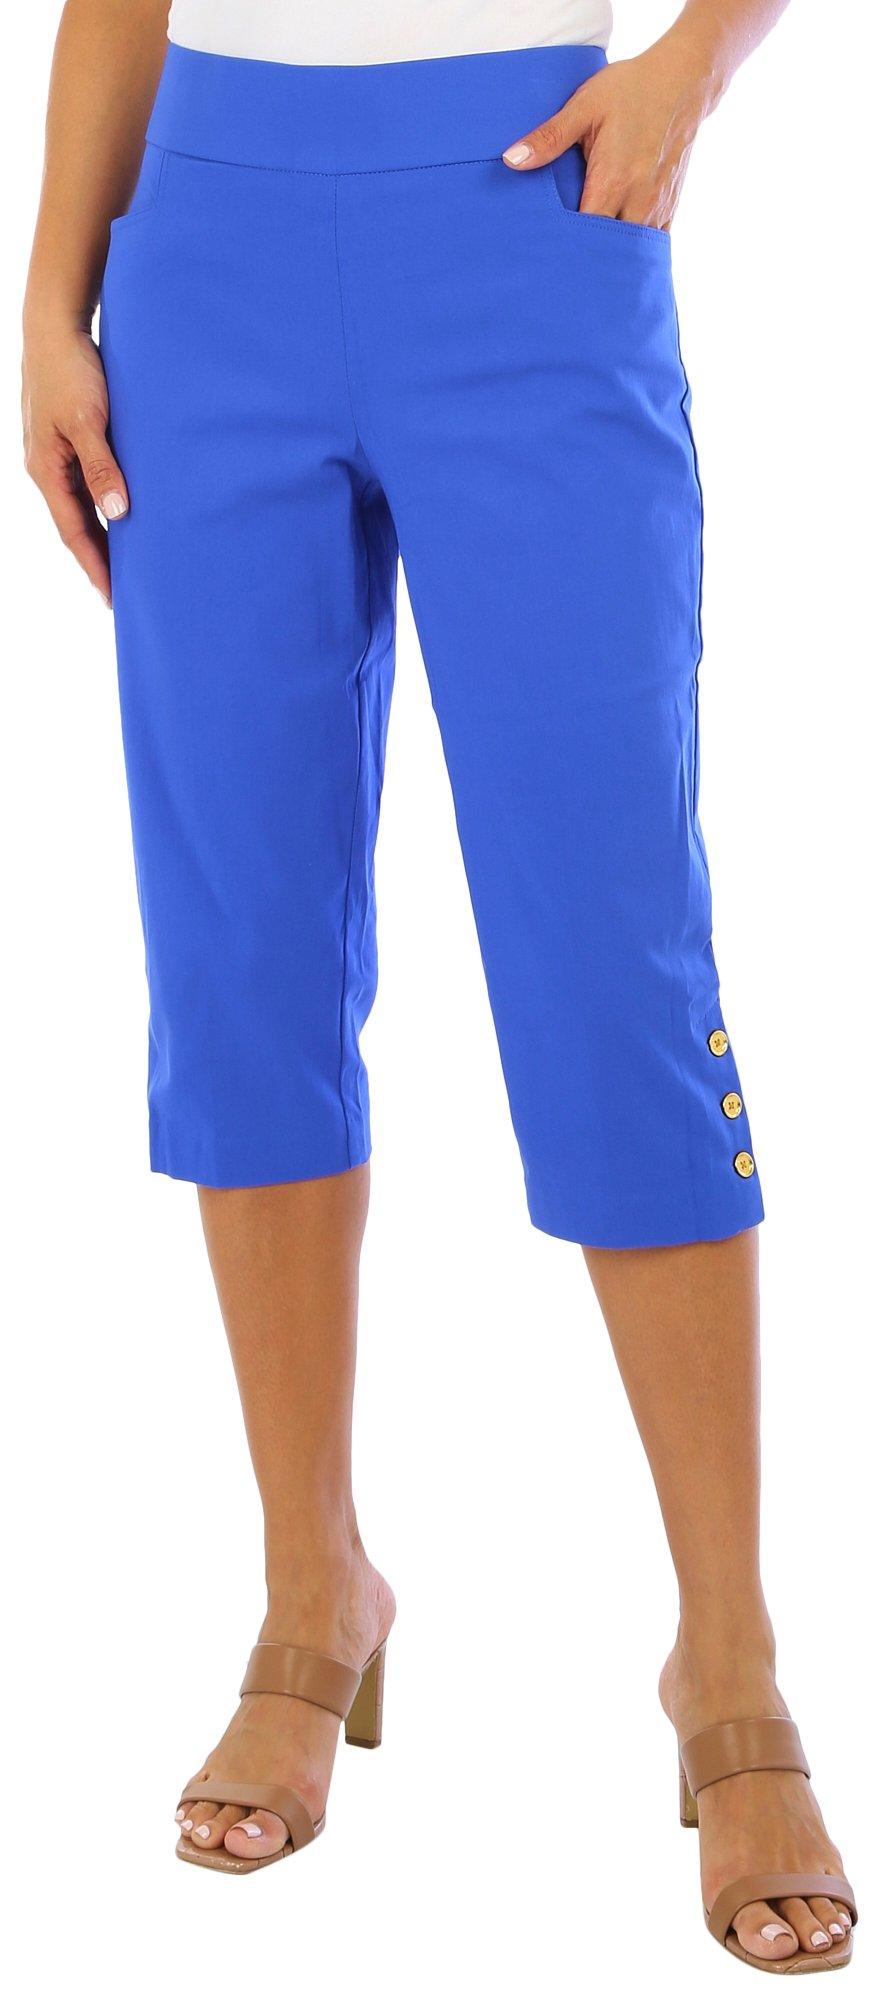  Coral Bay Womens 21in. Solid French Terry Capris Small